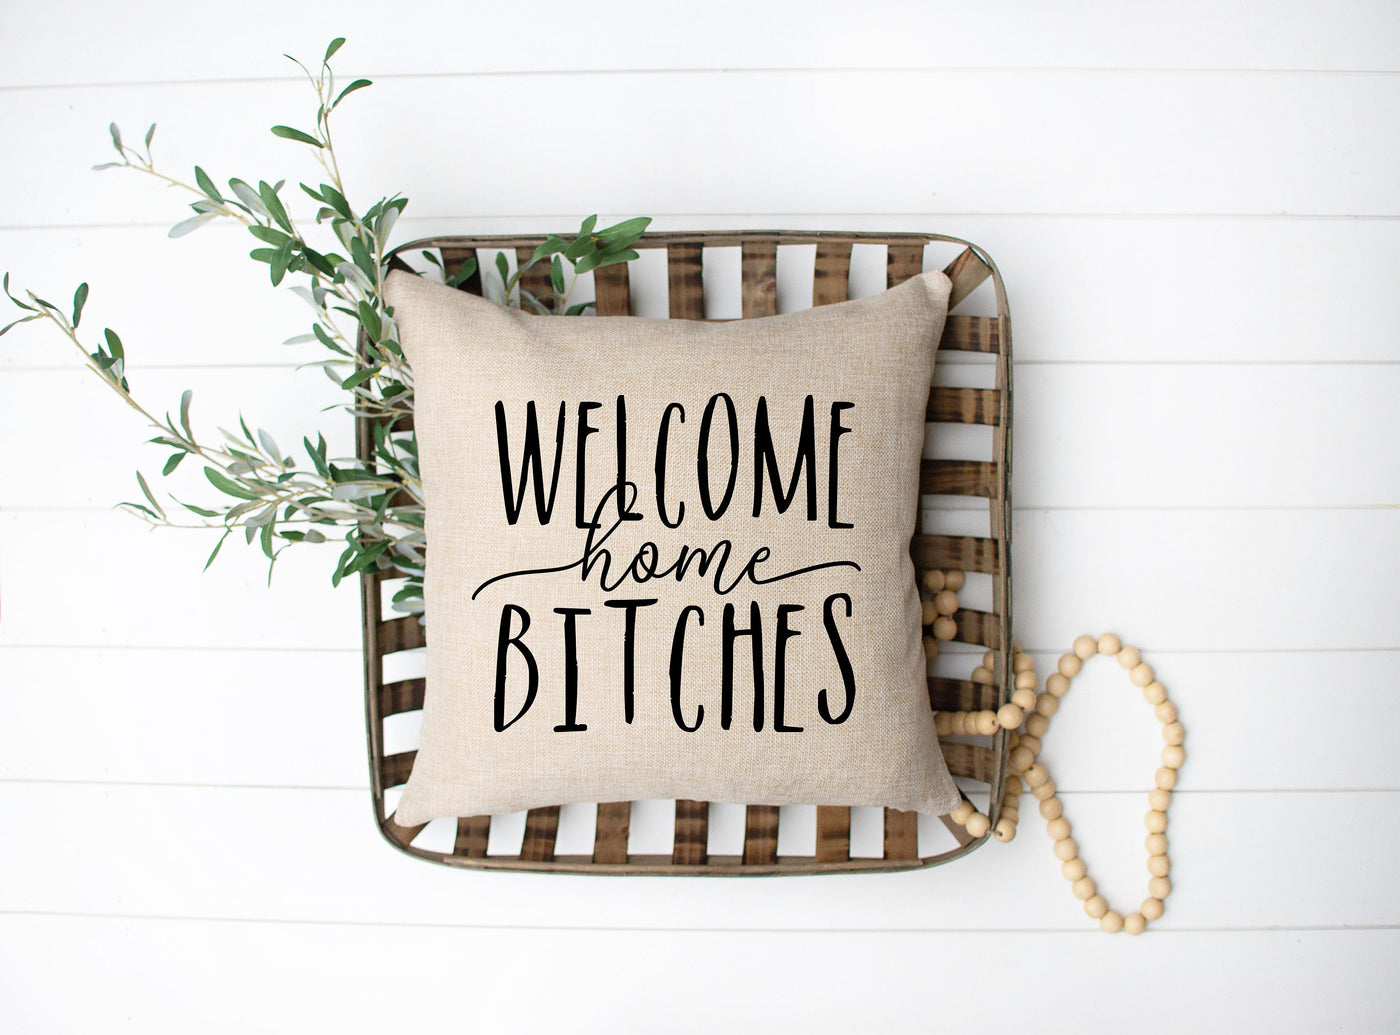 Funny Dorm Pillow Cover, Welcome Home Bitches, Funny Throw Pillow Cover, Funny Housewarming Pillow, Welcome Home Pillow Cover, Girls Night